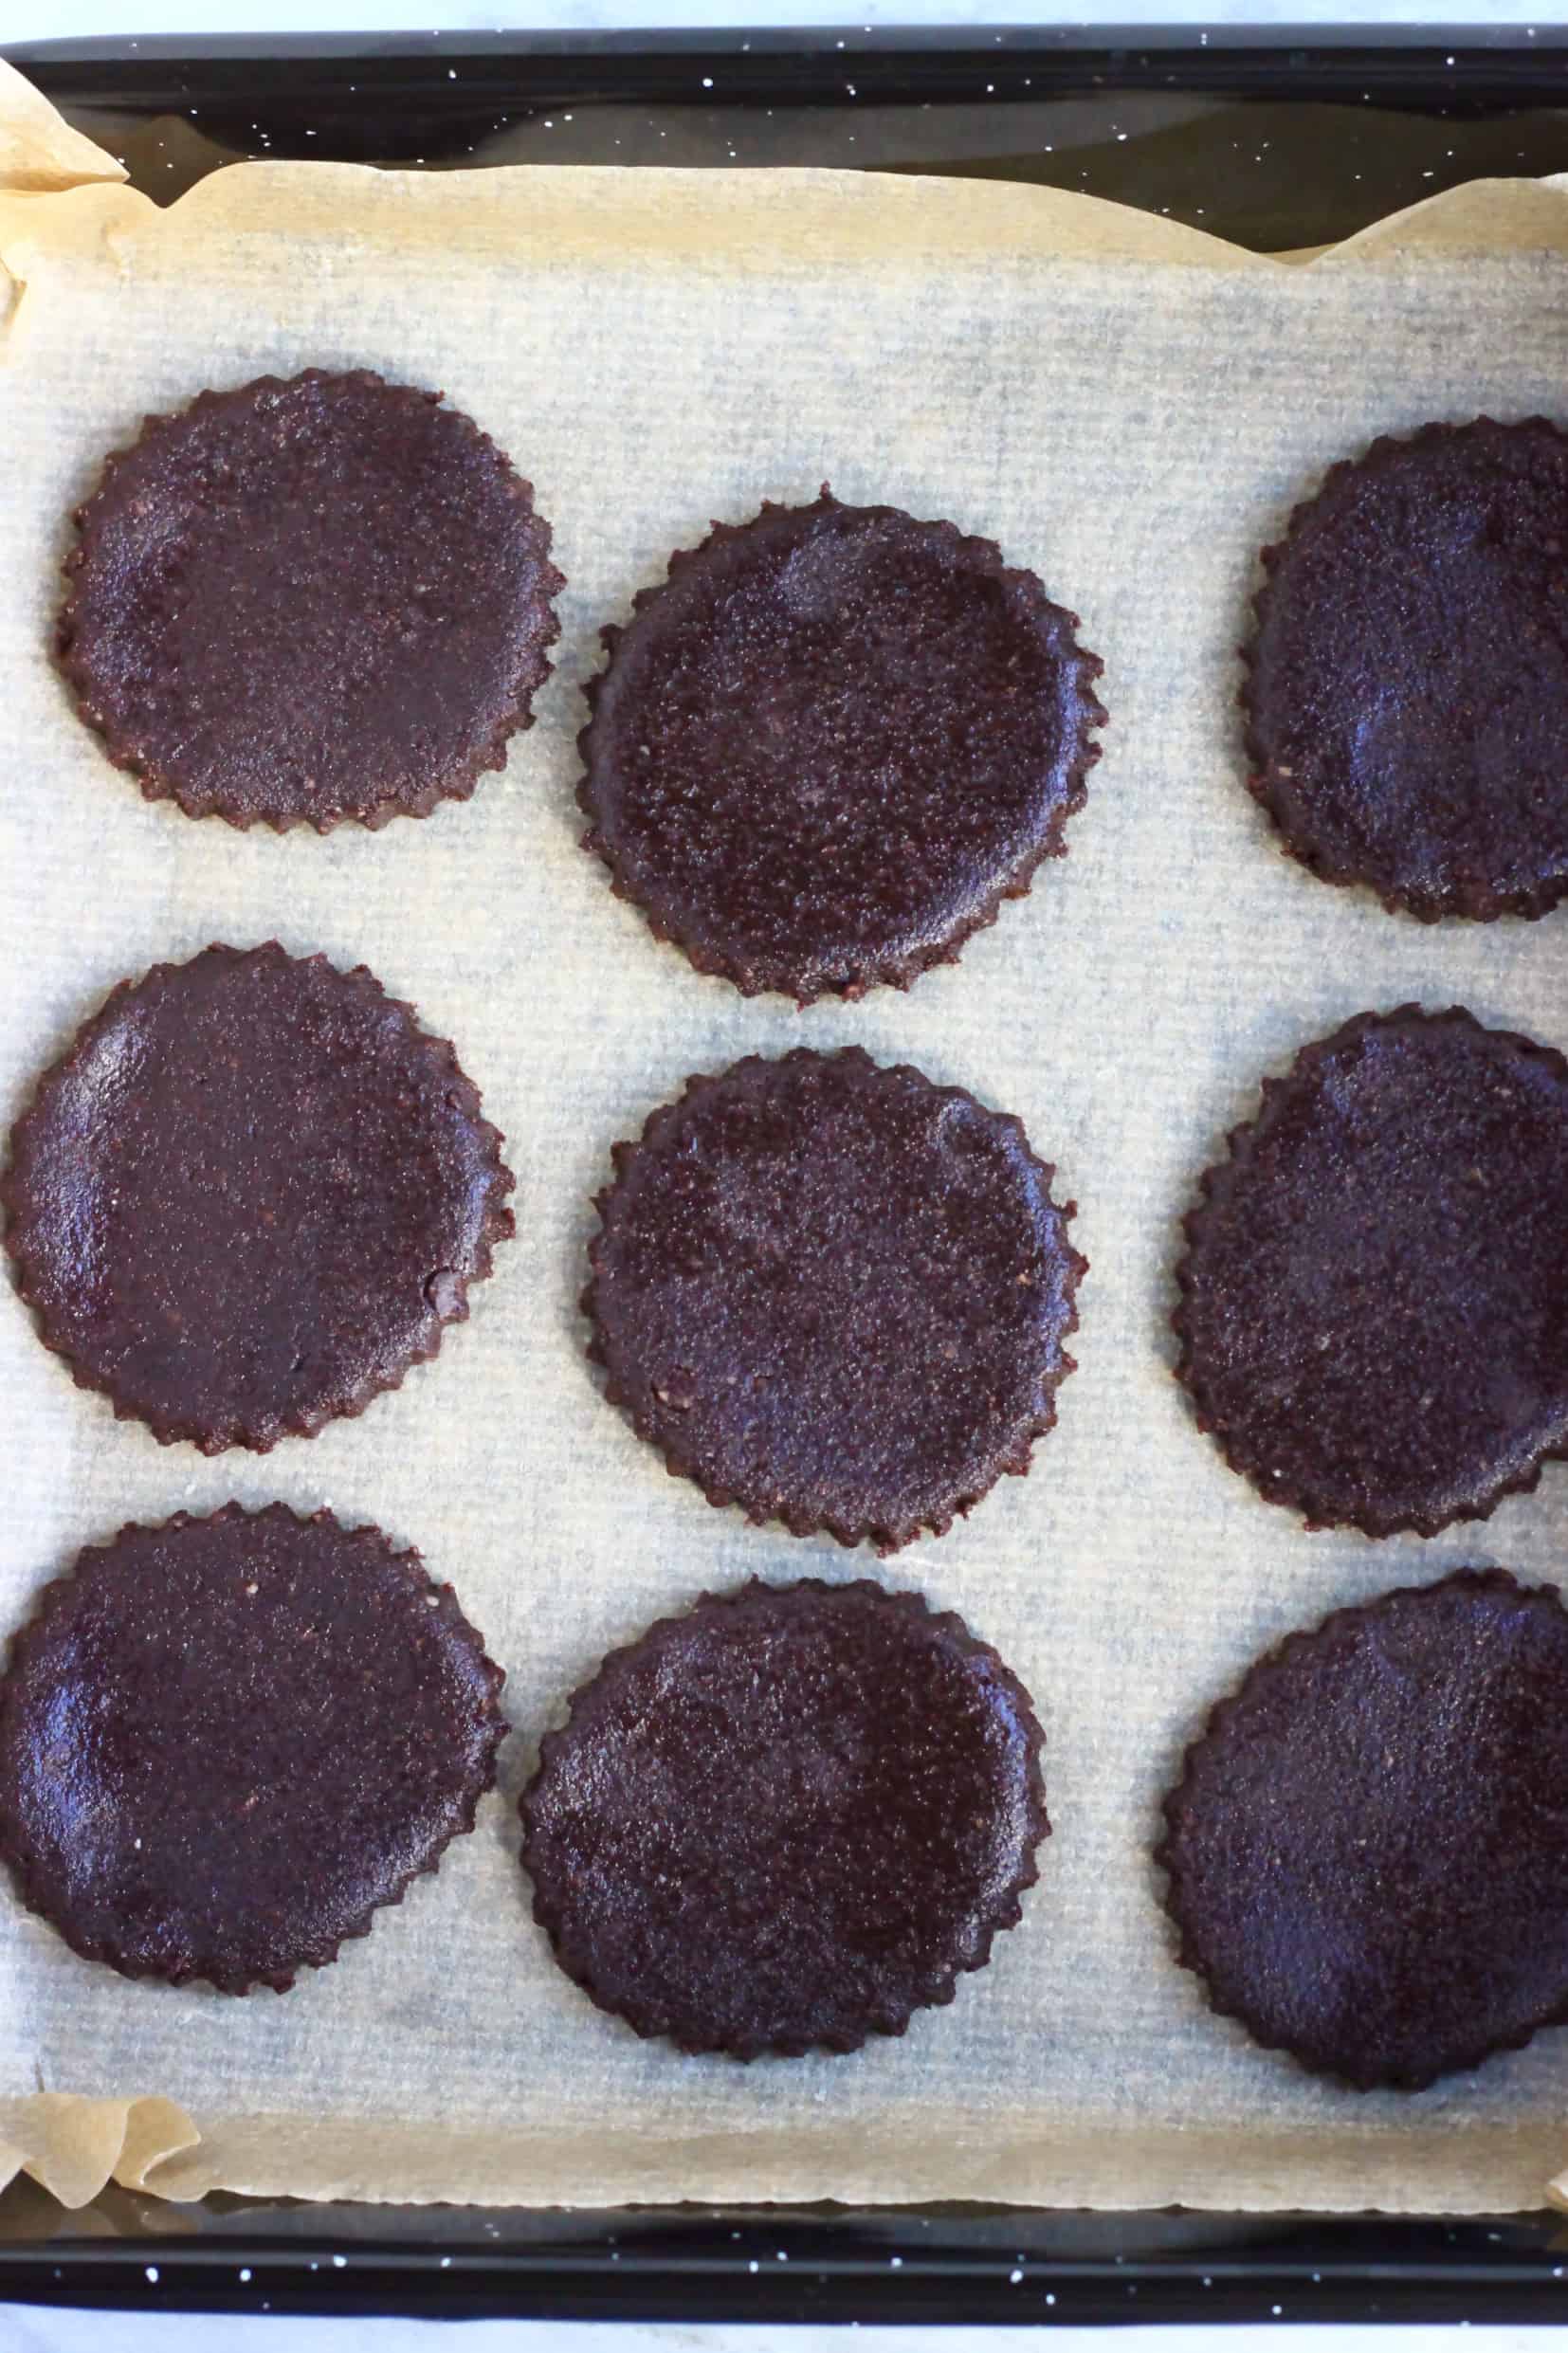 Nine raw gluten-free vegan homemade oreo cookie circles on a baking tray lined with baking paper